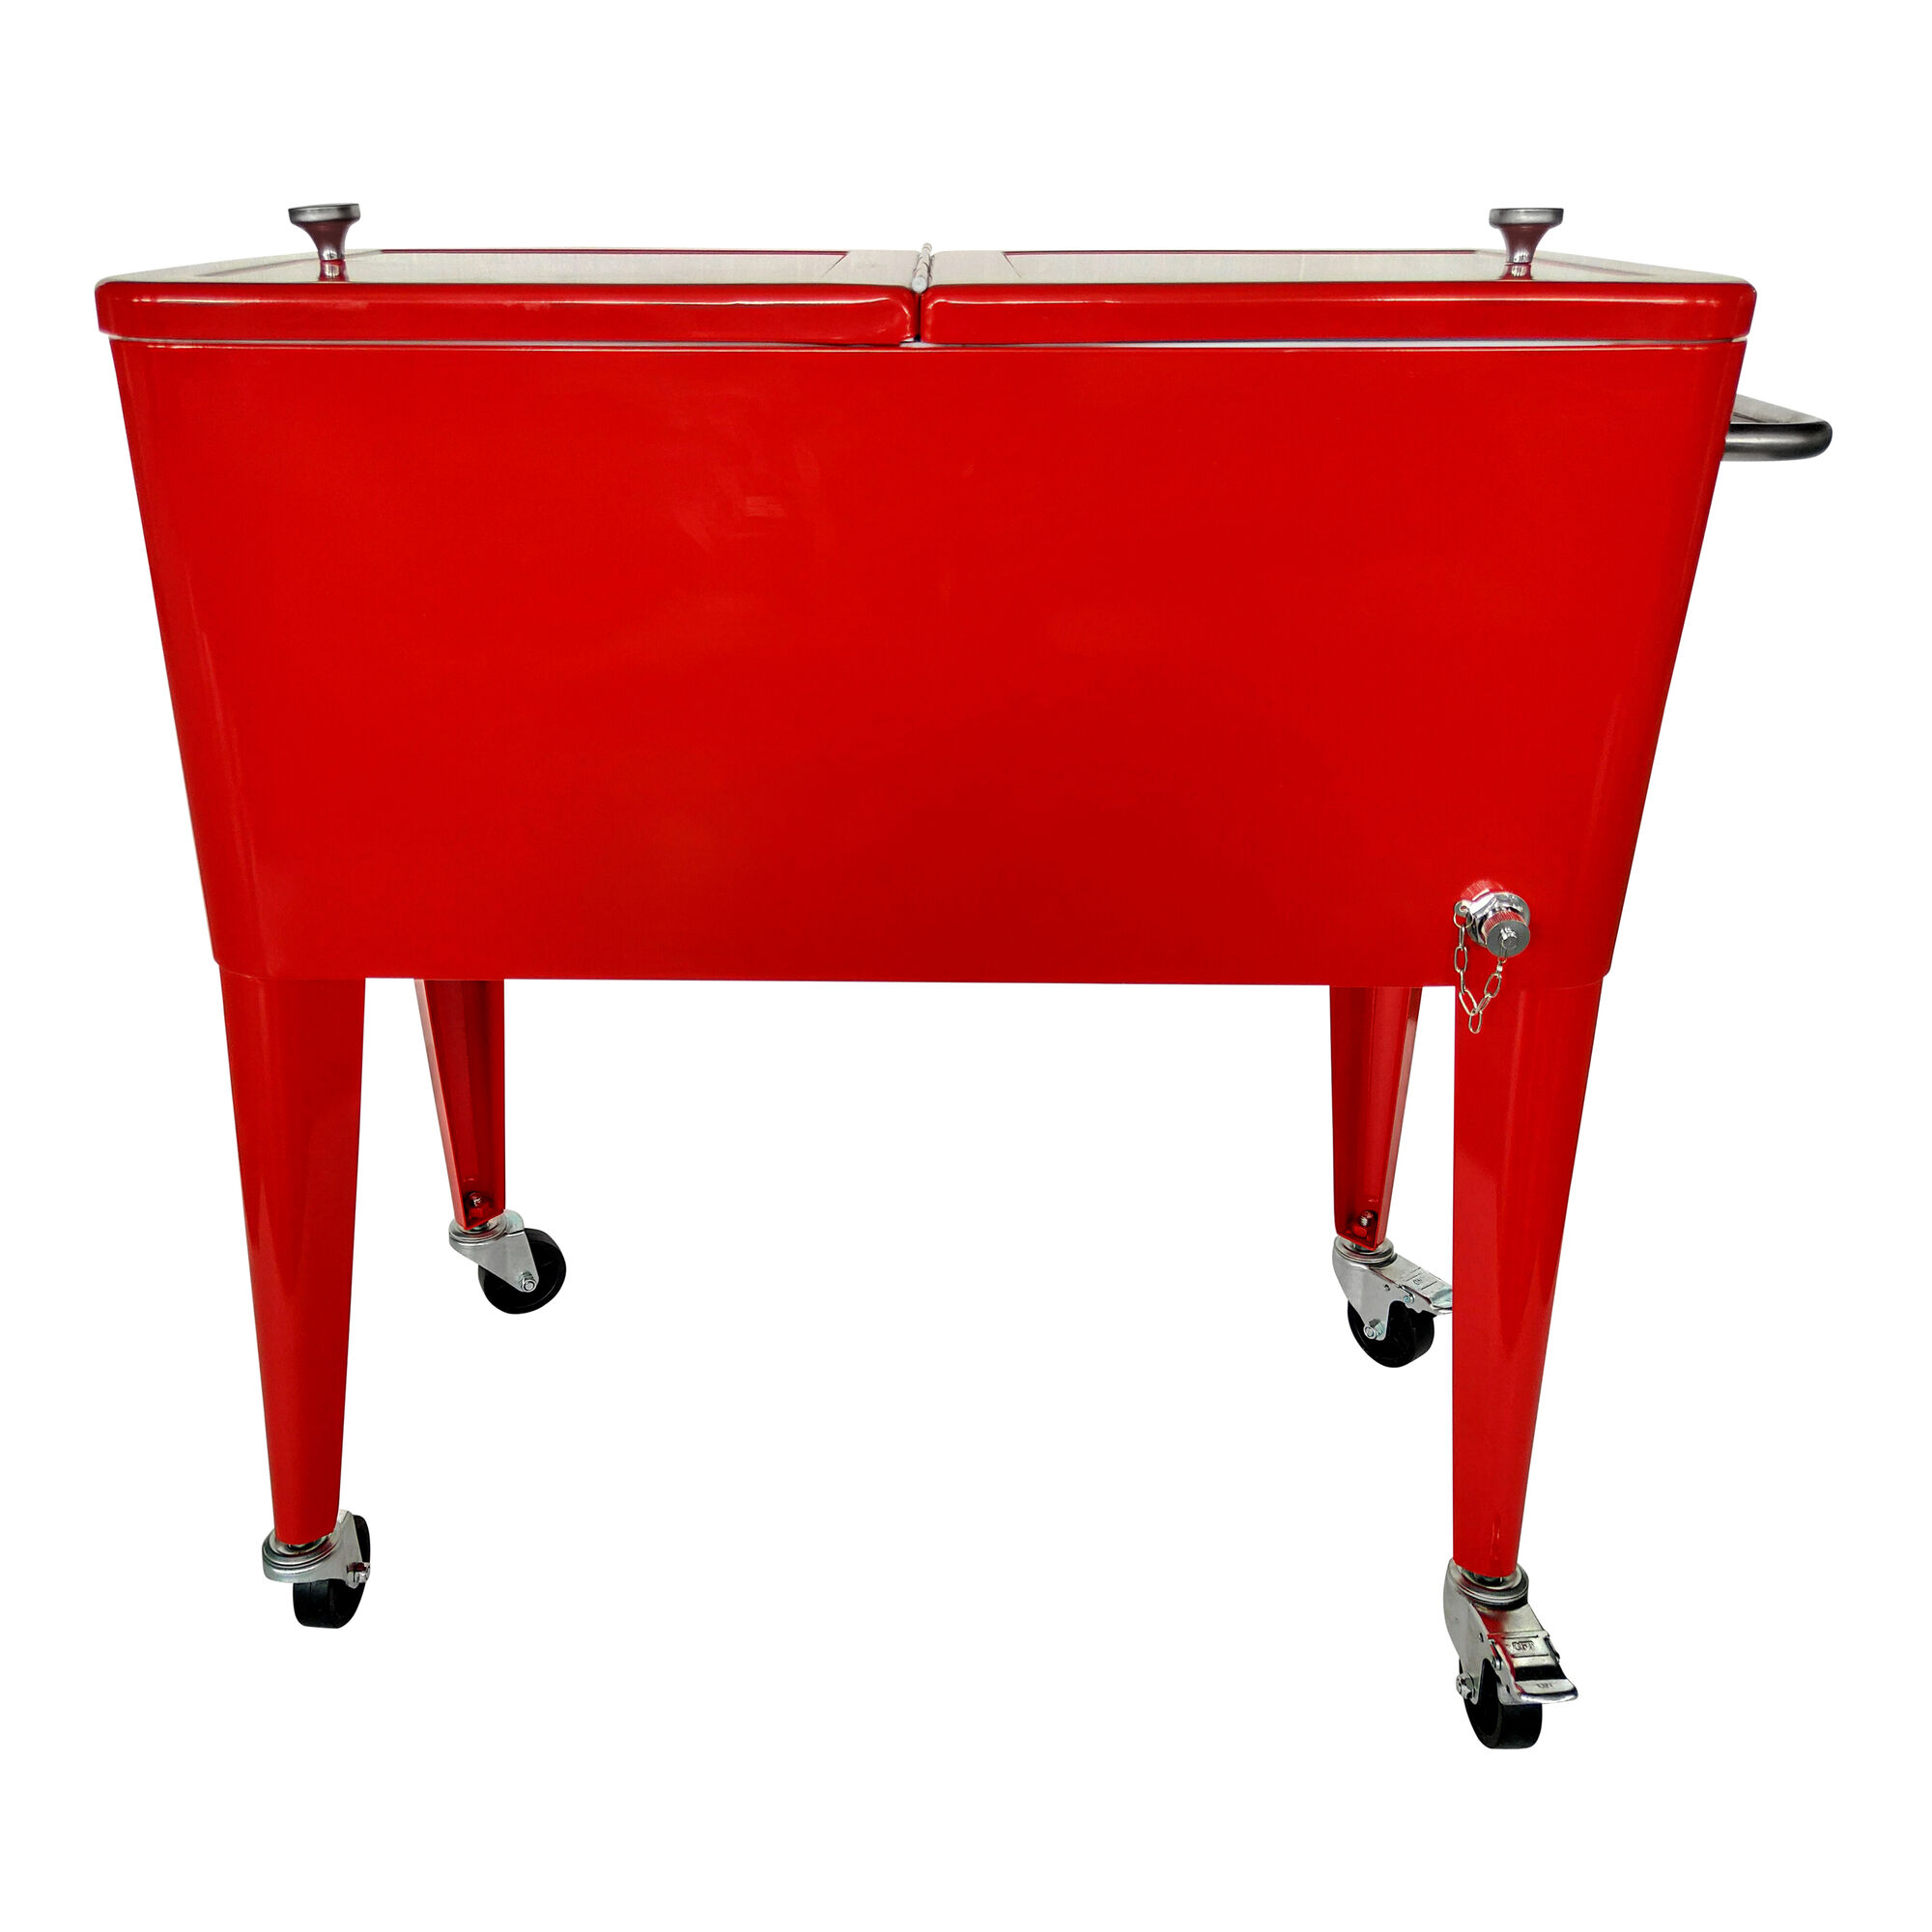 productfoto AXI Retro Cooler Rood